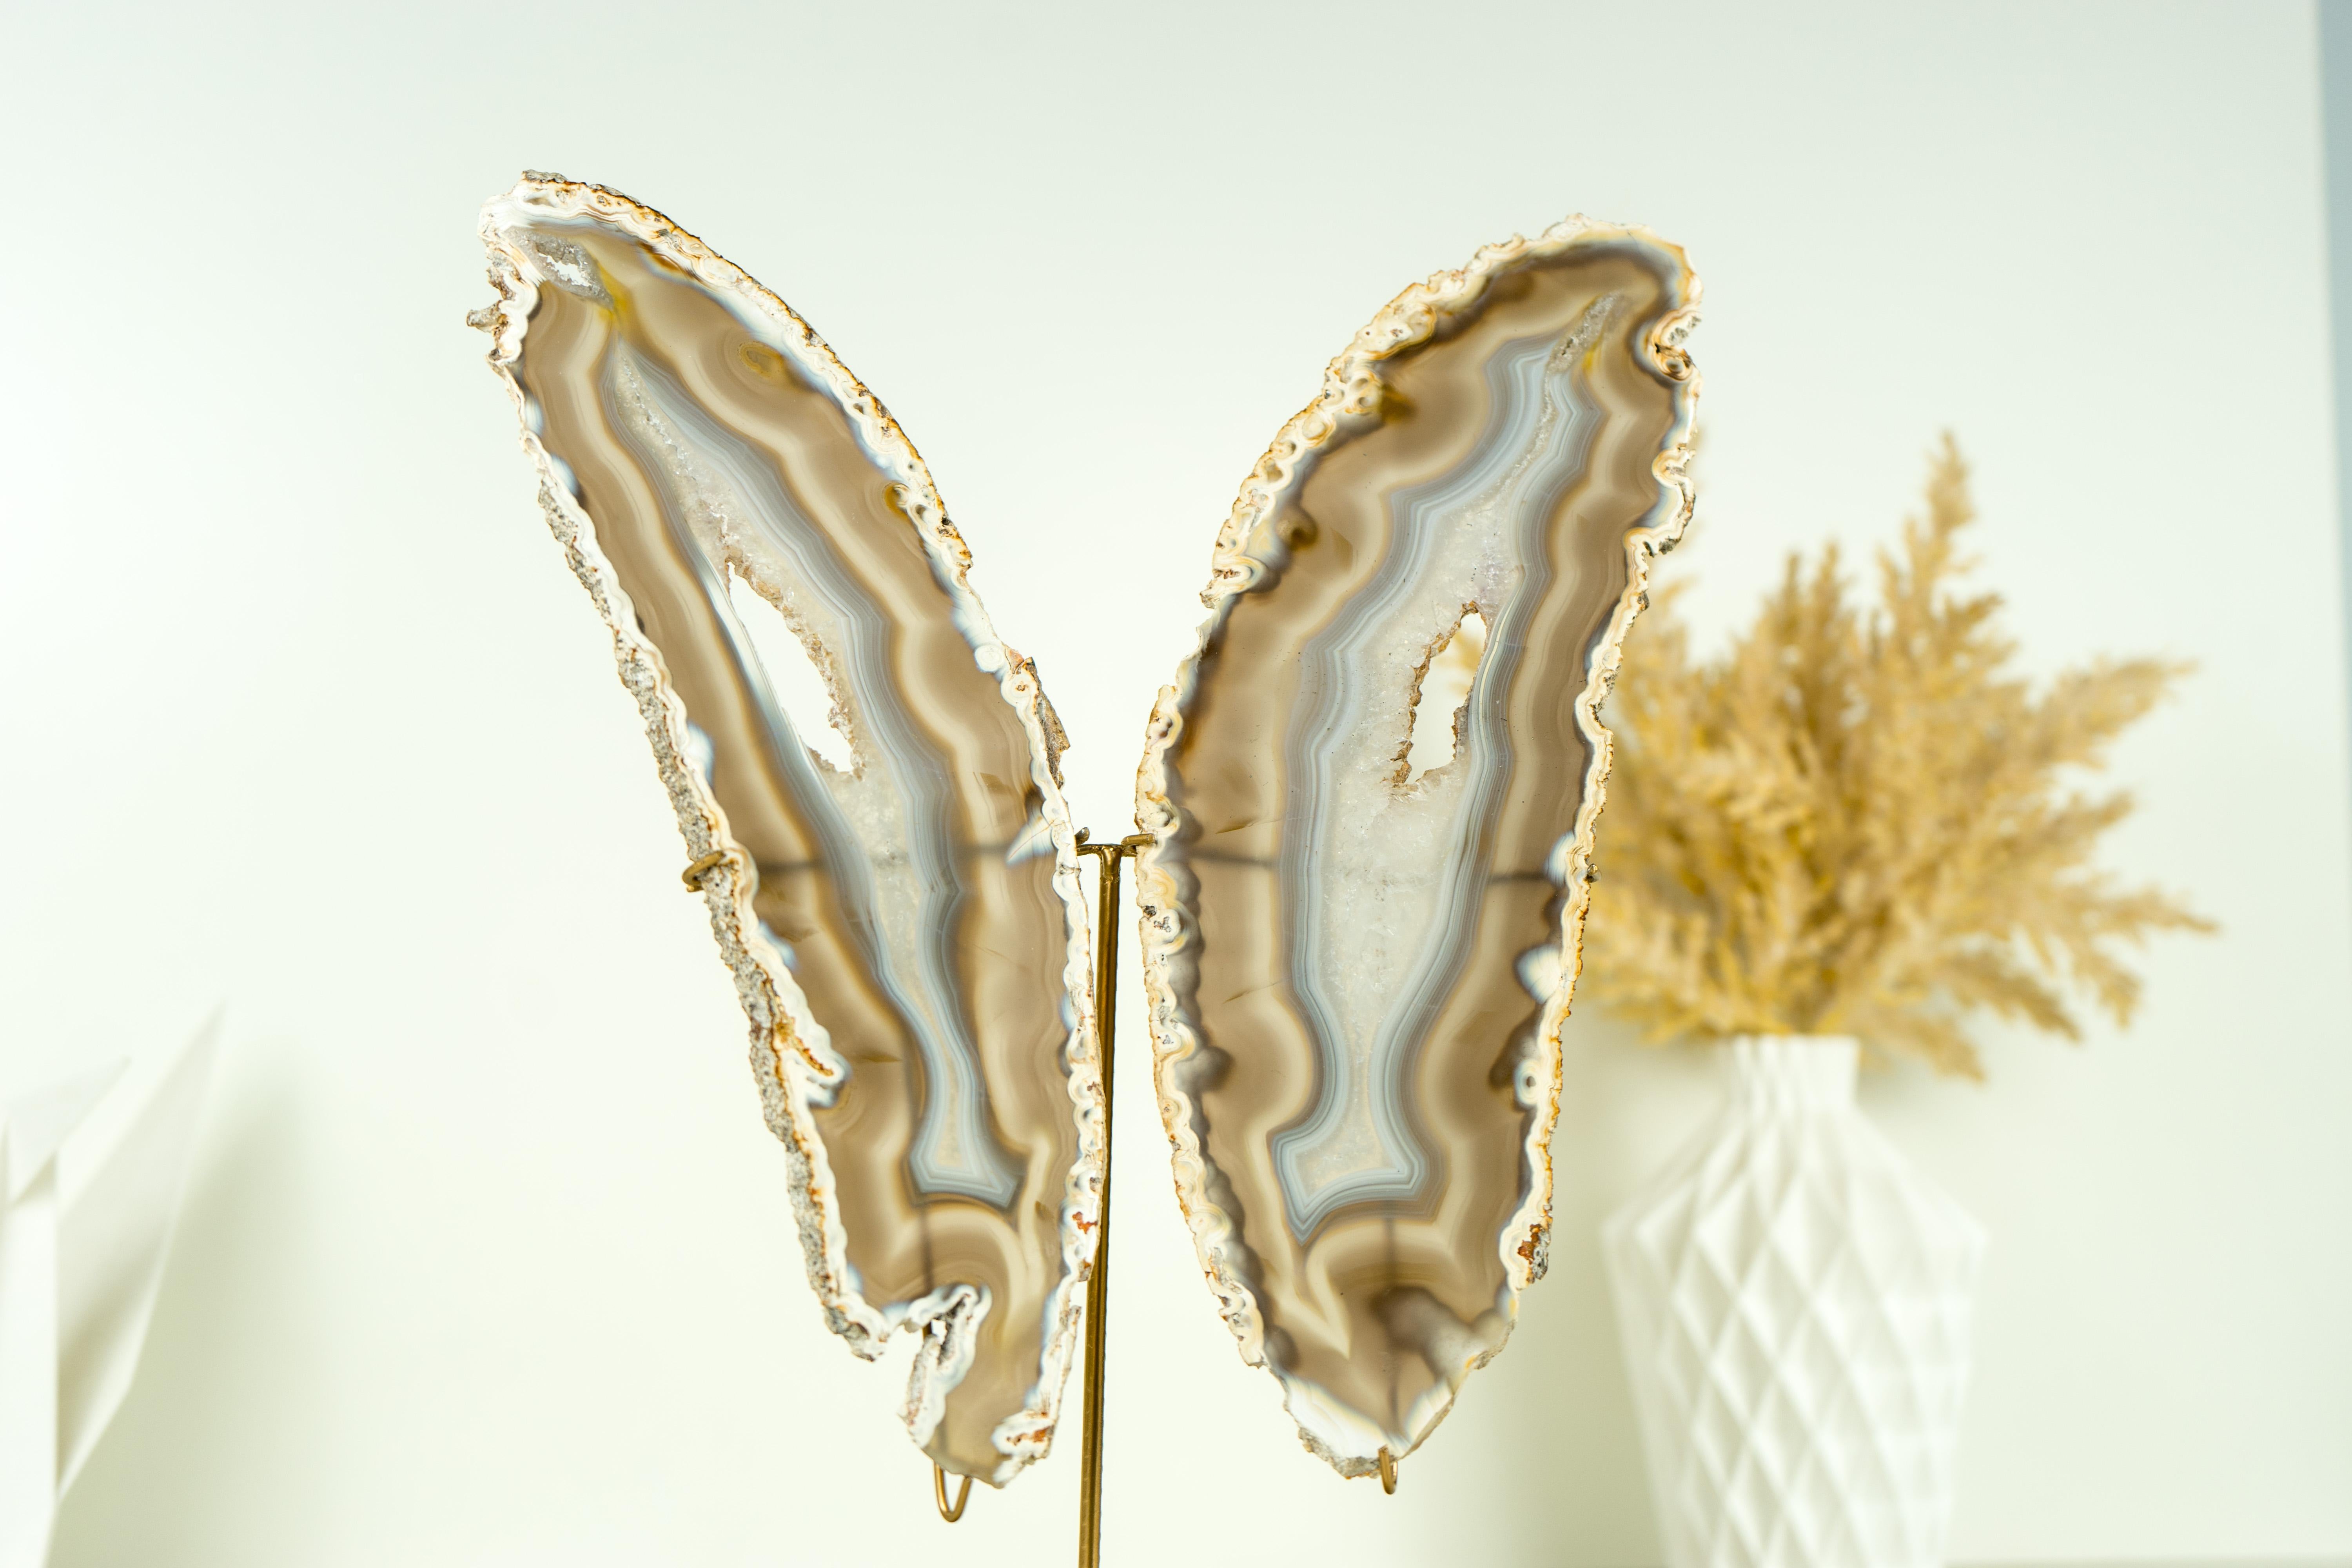 Brazilian Natural Rare Iridescent Agate Butterfly, Handmade Crystal Accent Decor For Sale